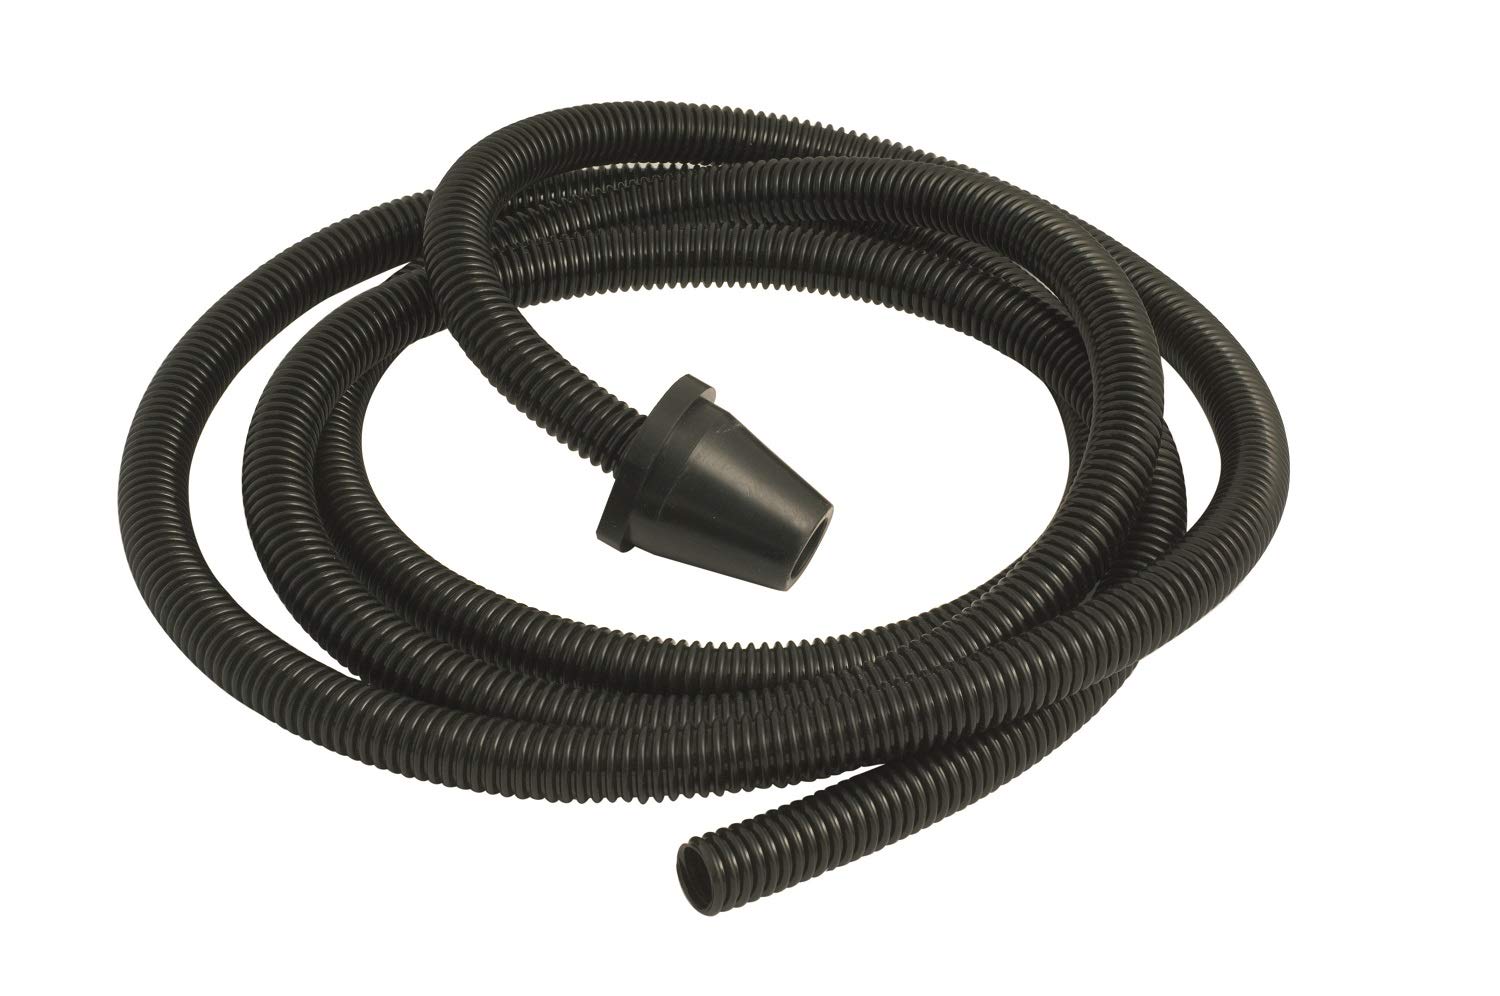 Mirka 91100-A 3/4-Inch by 12-Feet Vacuum Hose for Vacuum Blocks with adapter, Black